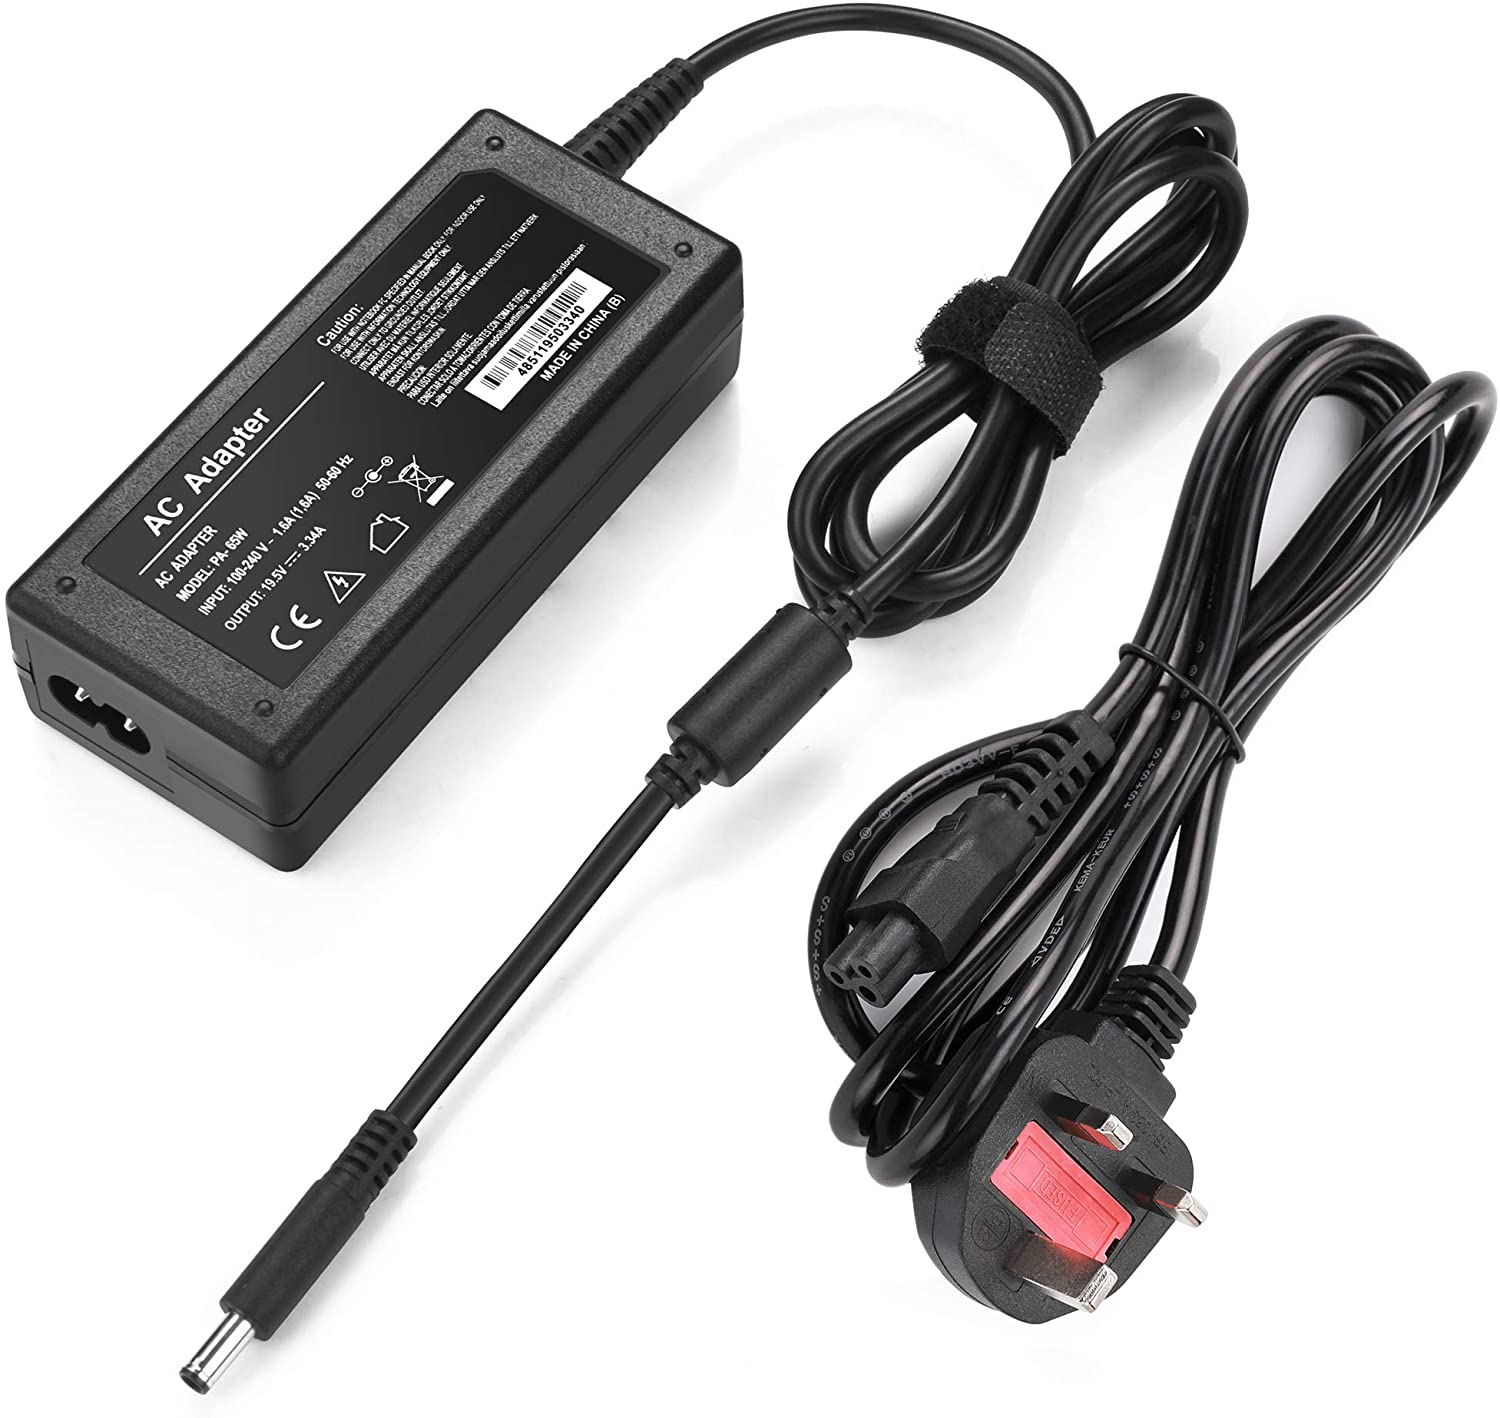 Dell Inspiron 17-7000 Charger